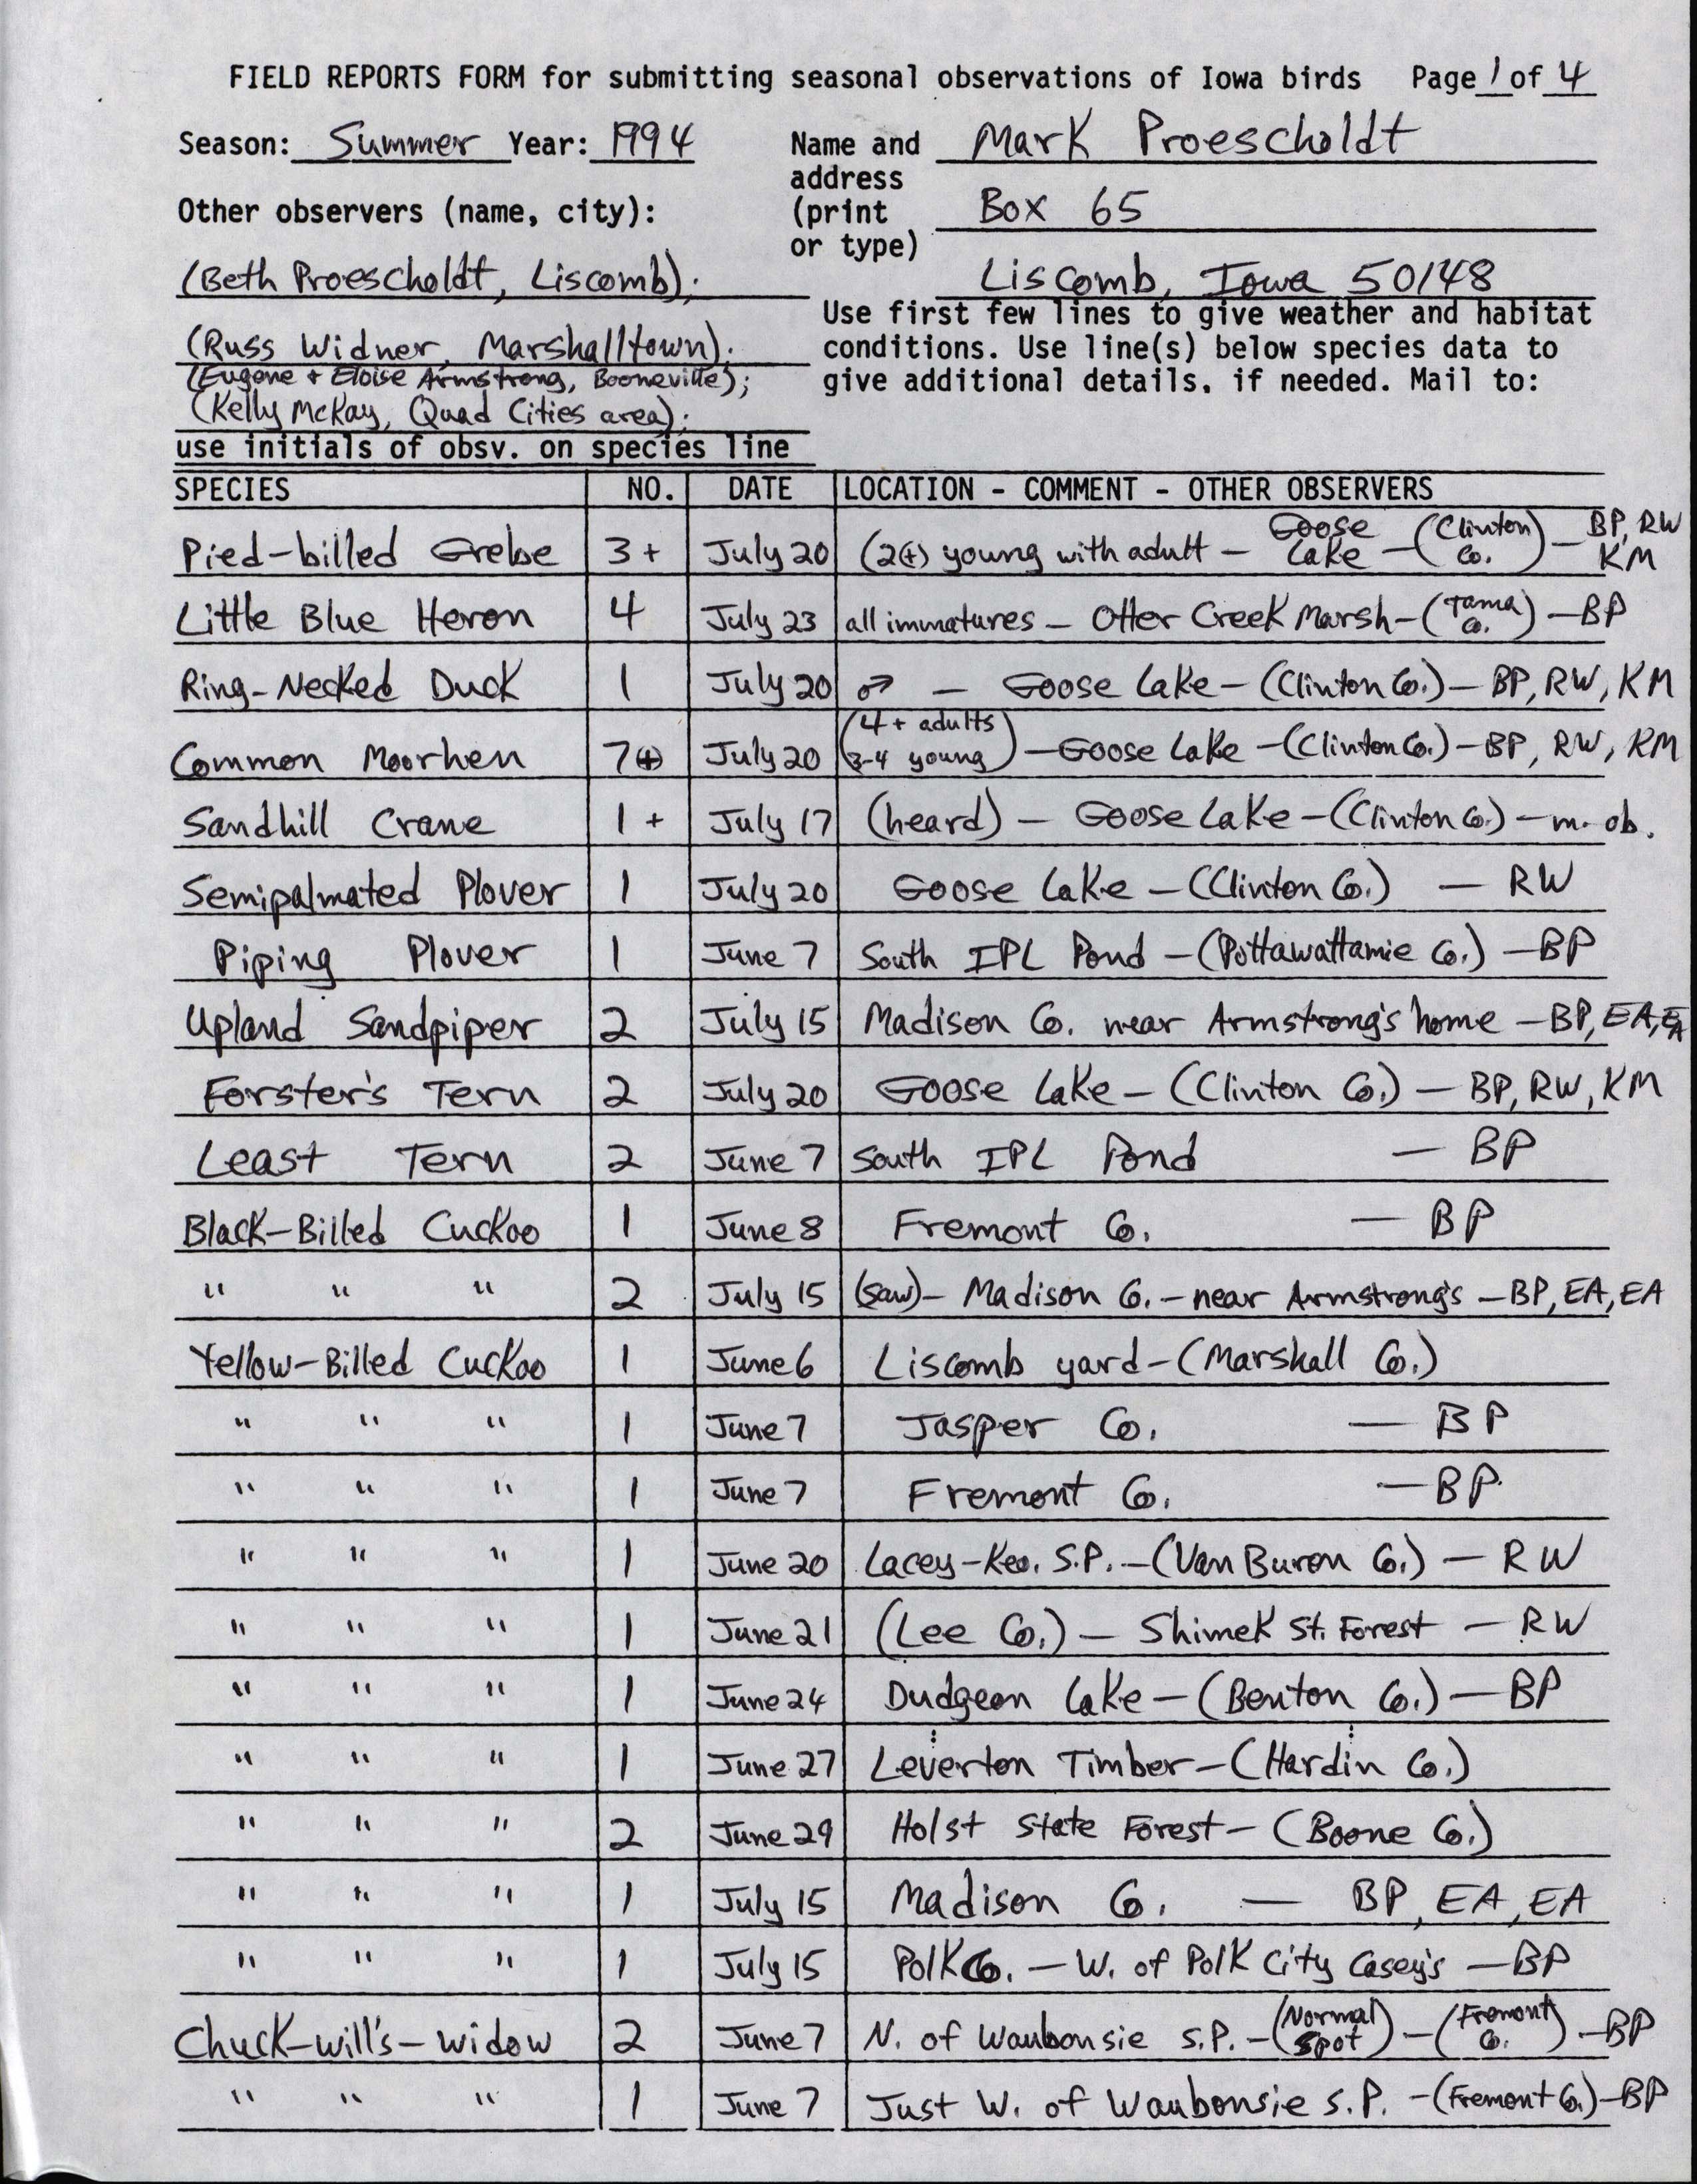 Field reports form for submitting seasonal observations of Iowa birds, Mark Proescholdt, Summer 1994